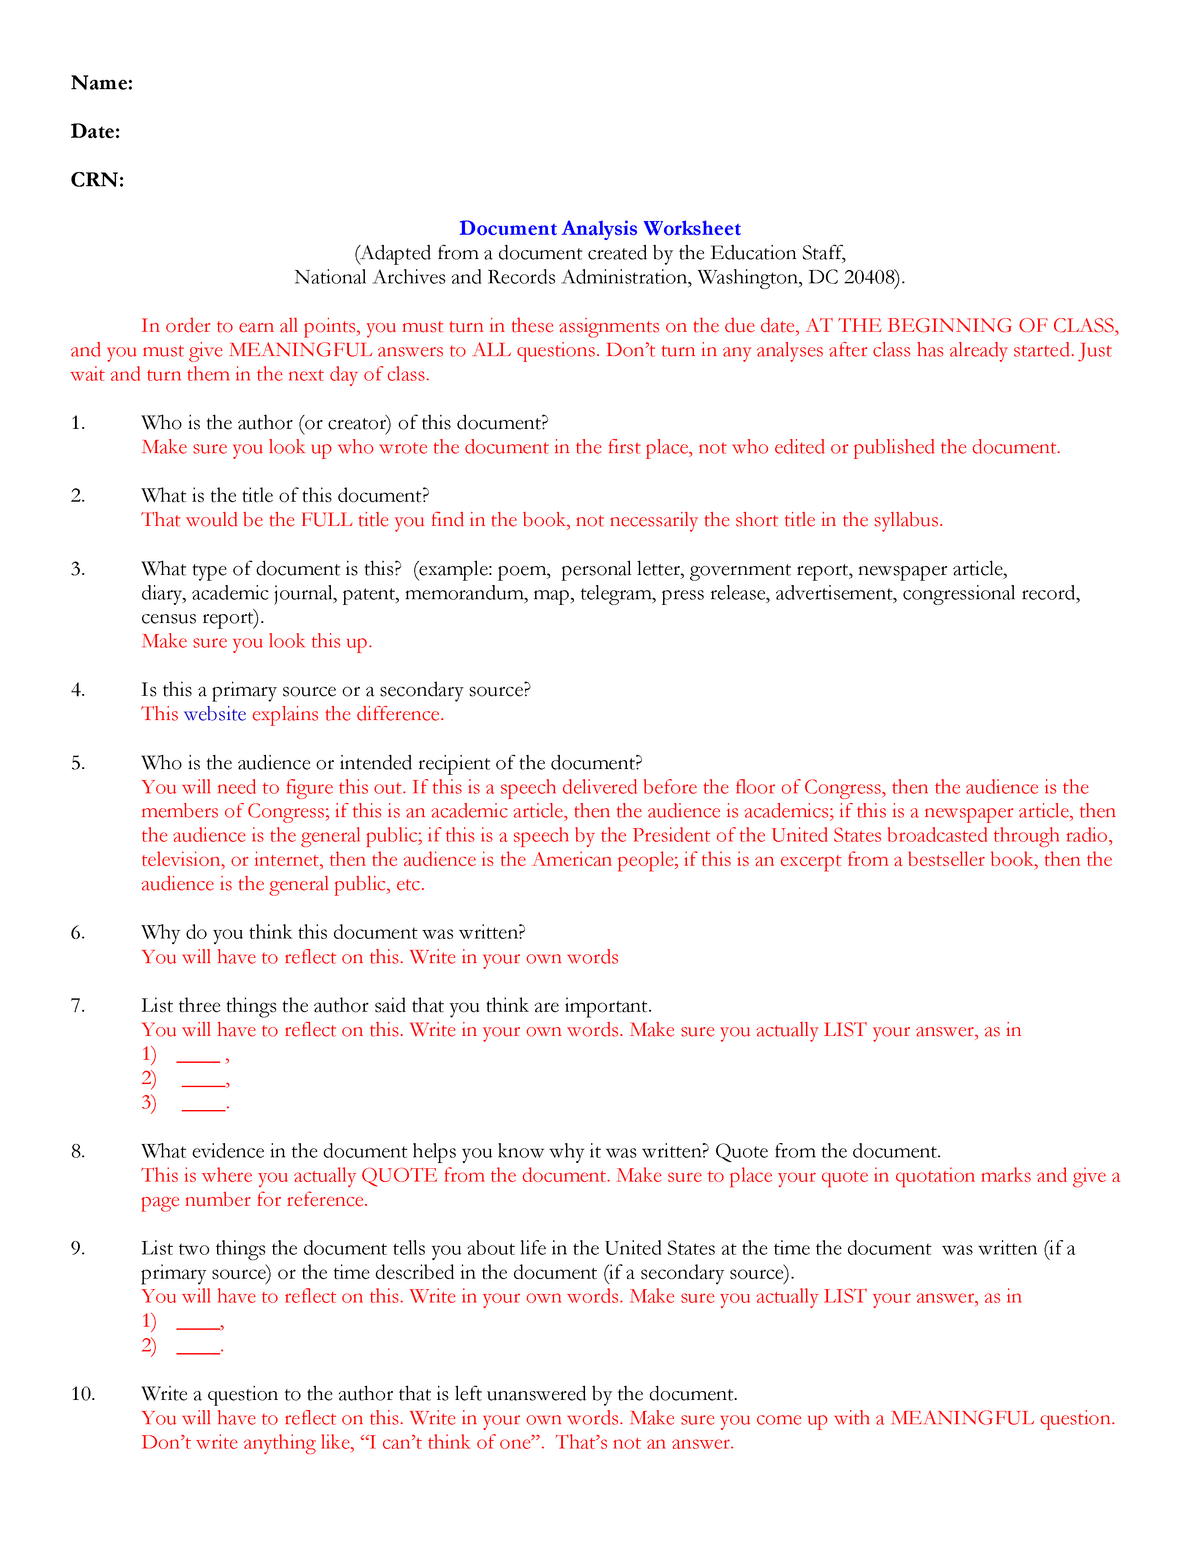 Guidelines - Document Analysis Worksheet - Name: Date: CRN Inside Written Document Analysis Worksheet Answers